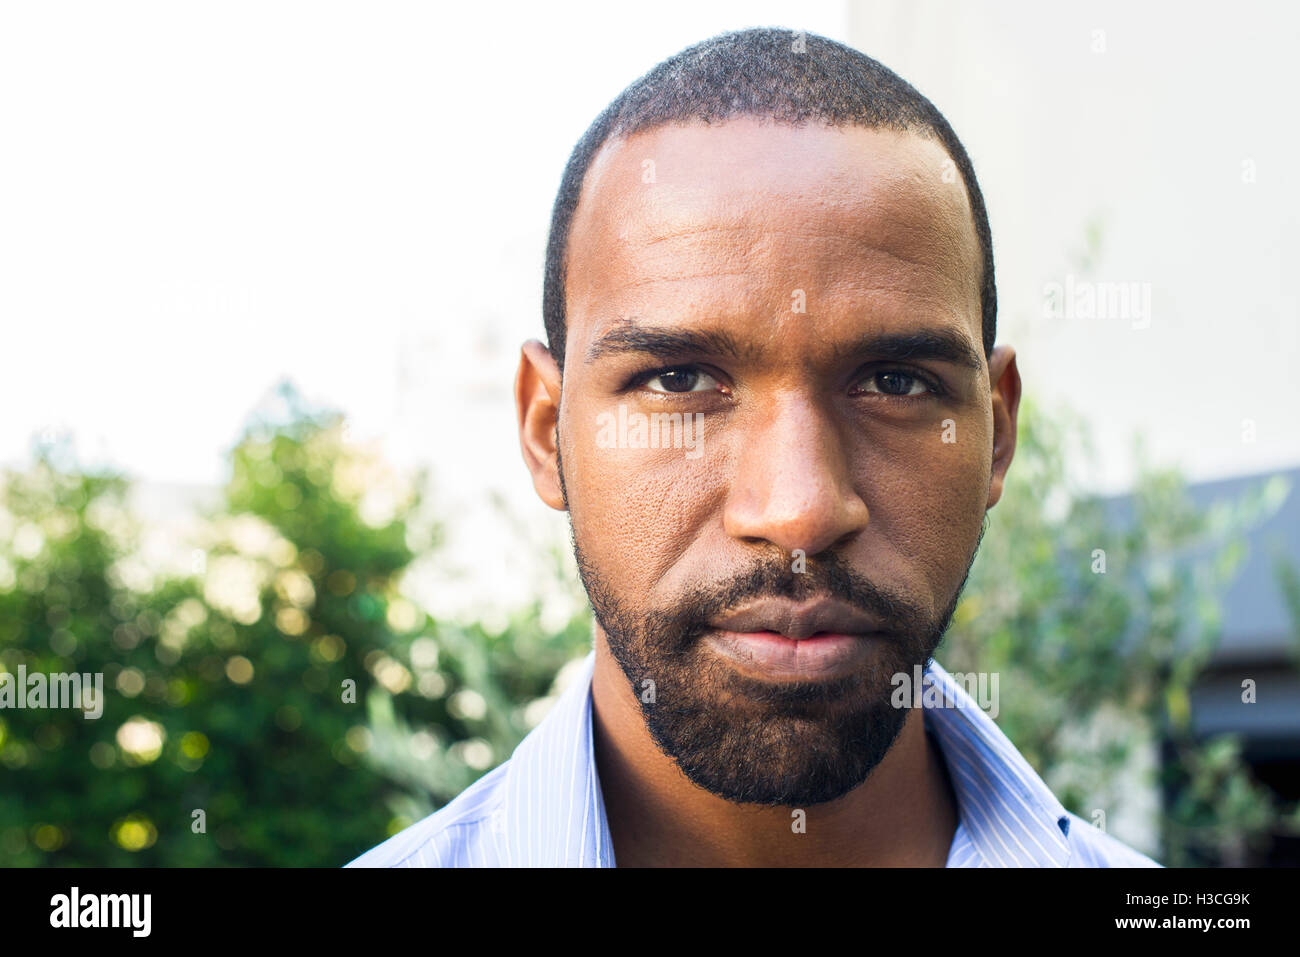 Man with determined expression, portrait Stock Photo